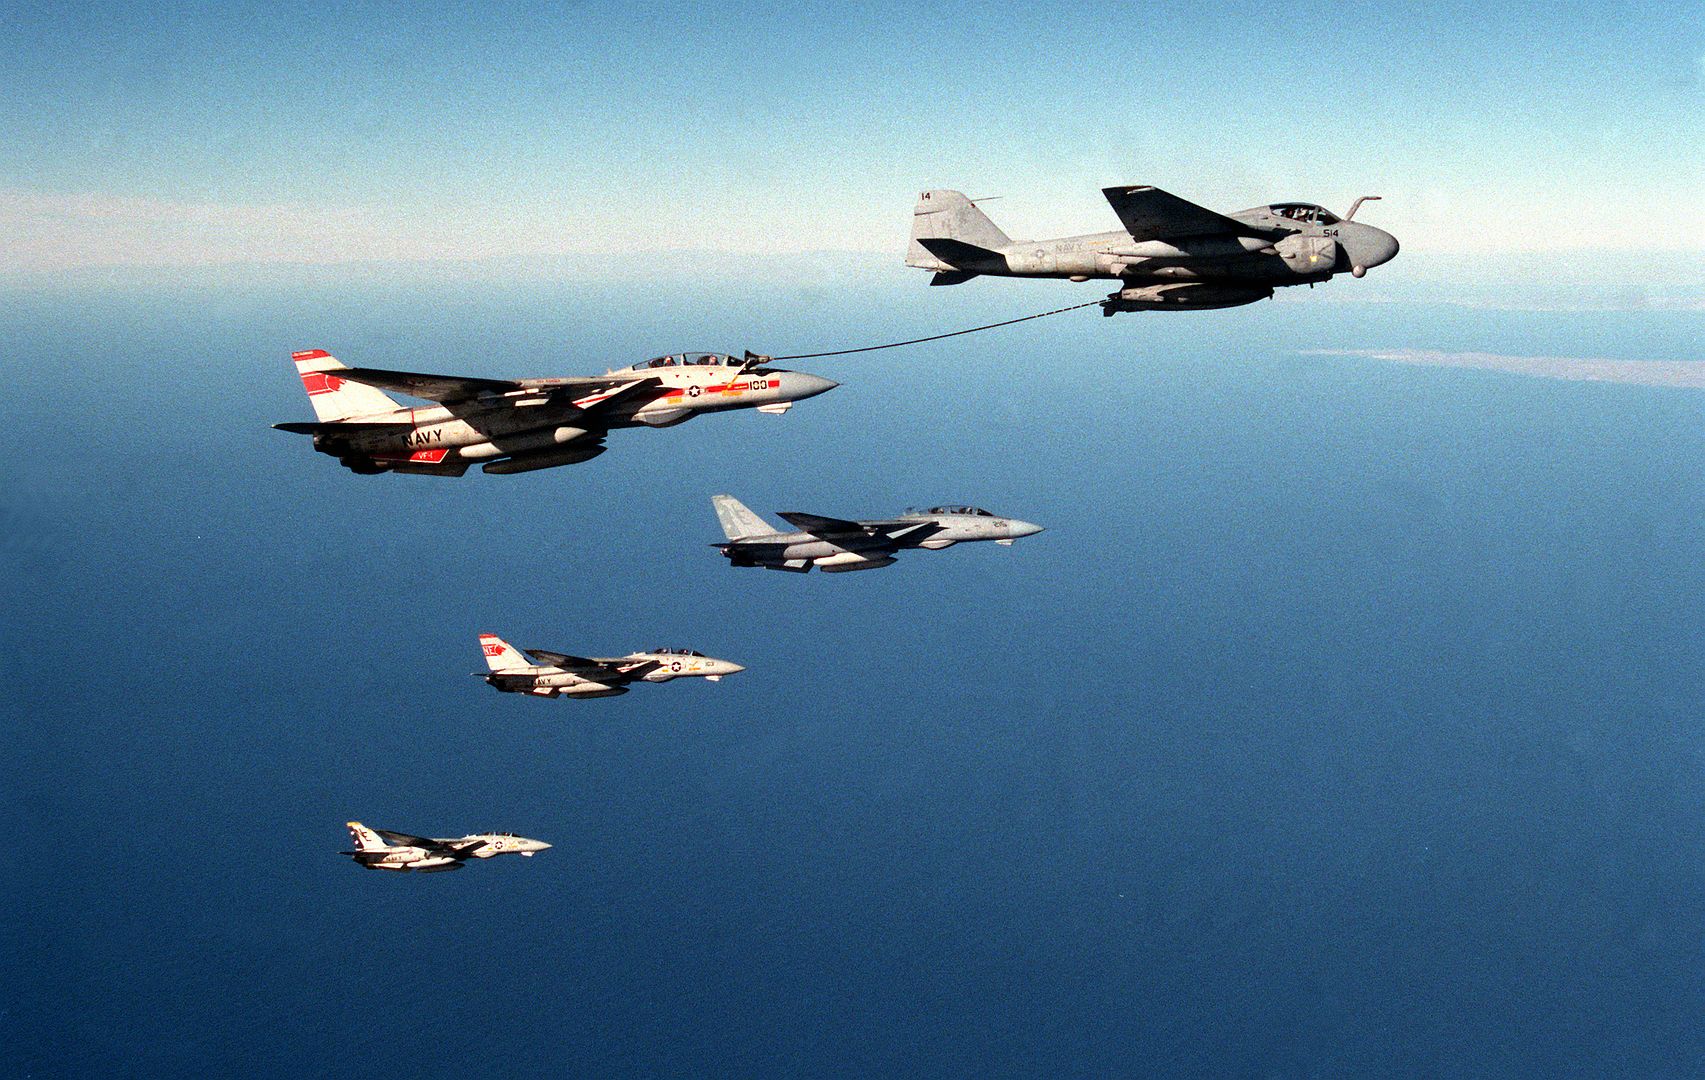 A Fighter Squadron 1 F 14A Tomcat Aircraft Receives Fuel From An Attack Squadron 145 A 6E Intruder